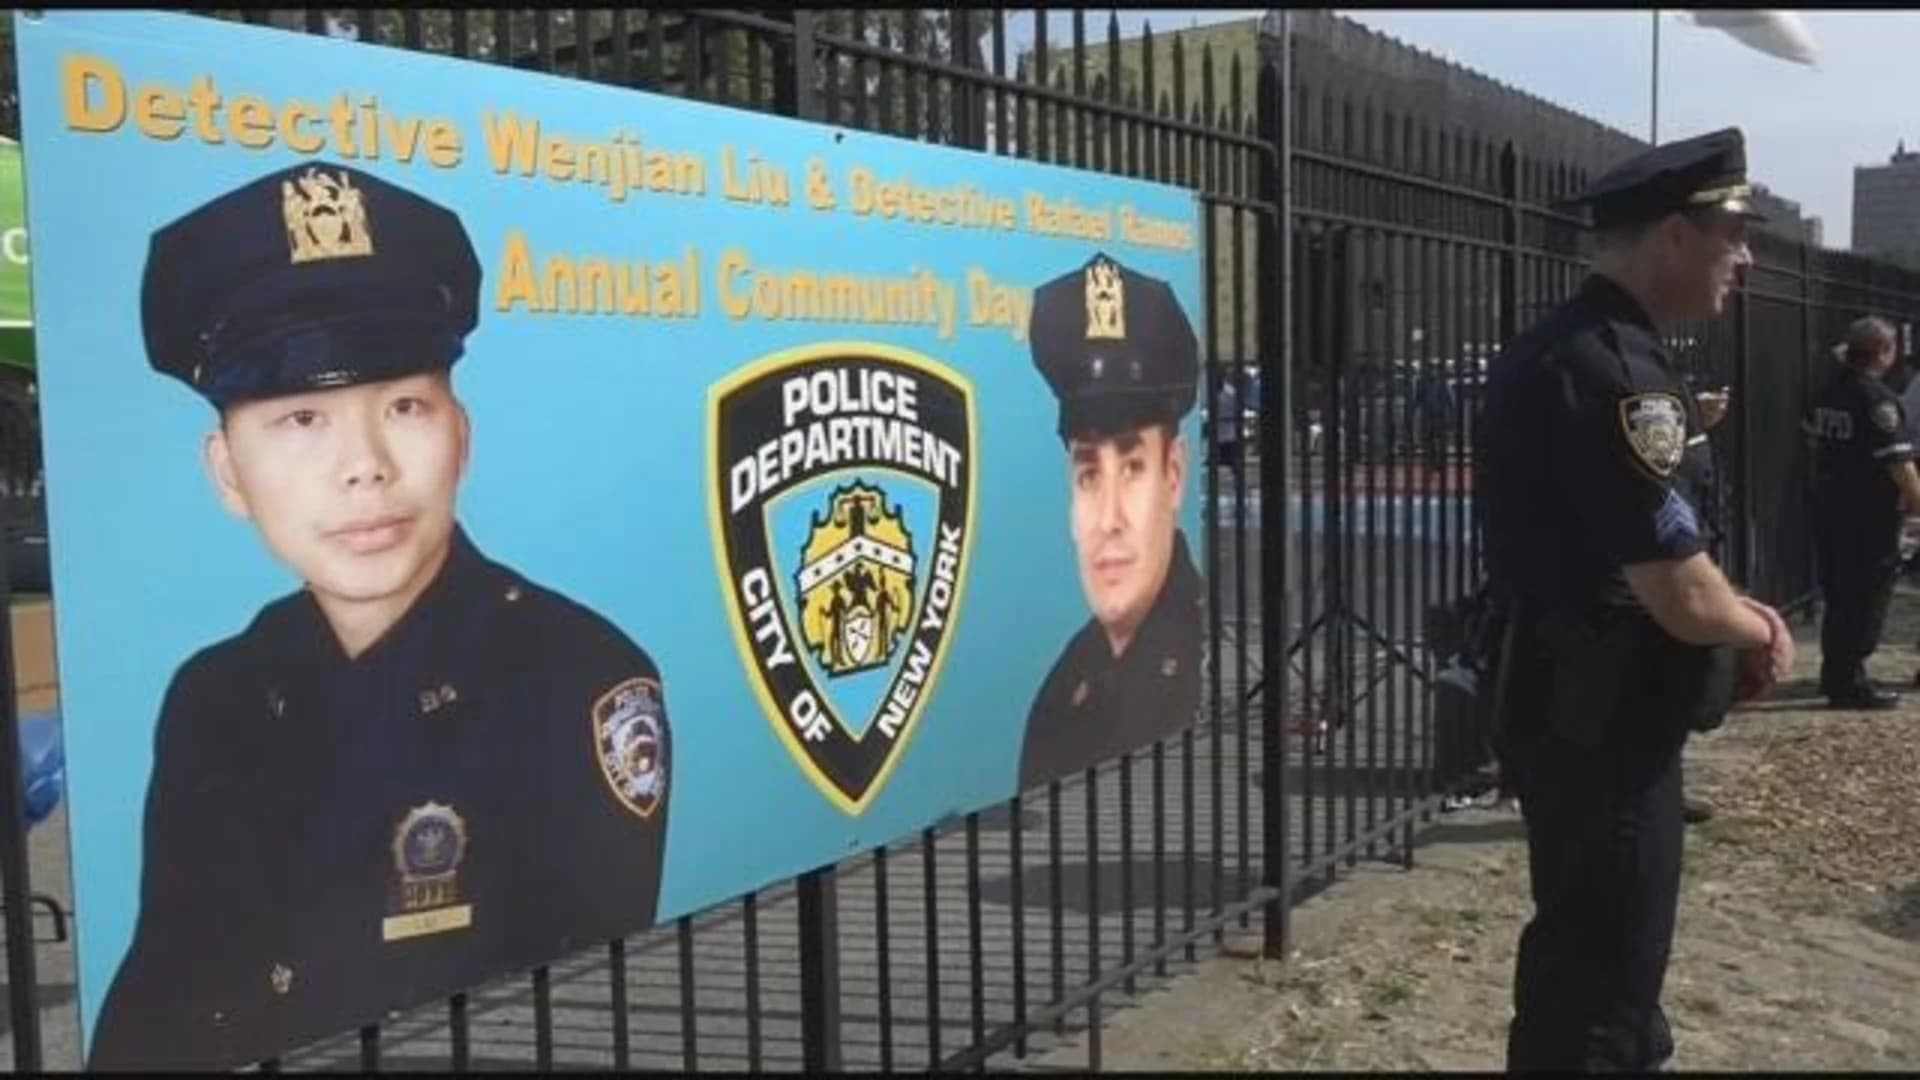 Community day held in Bed-Stuy to honor slain NYPD detectives